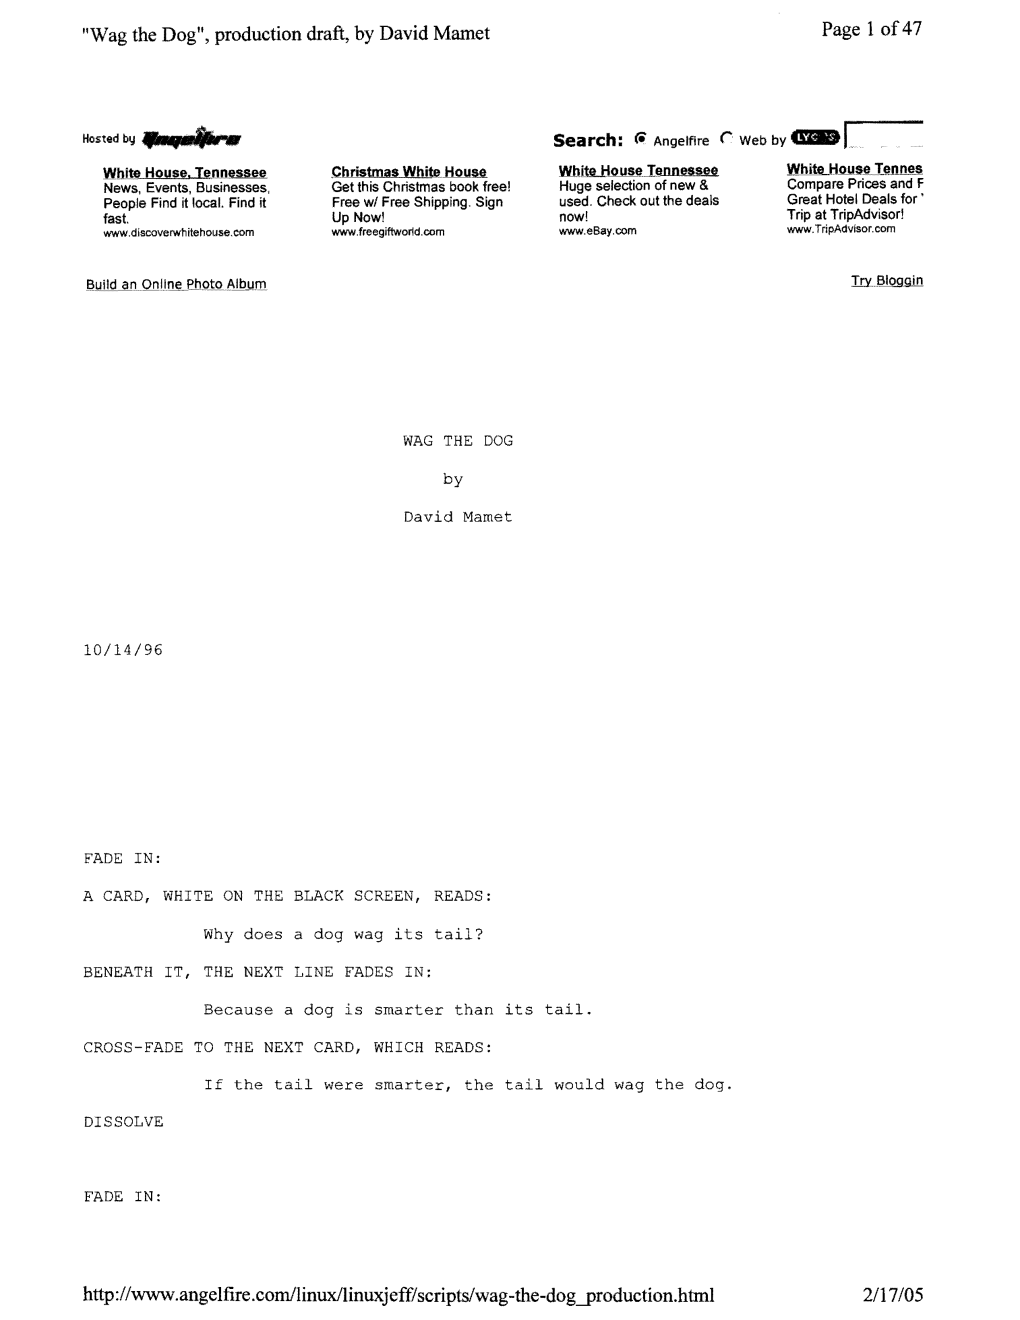 Page 1 Of47 "Wag the Dog", Production Draft, by David Mamet Http